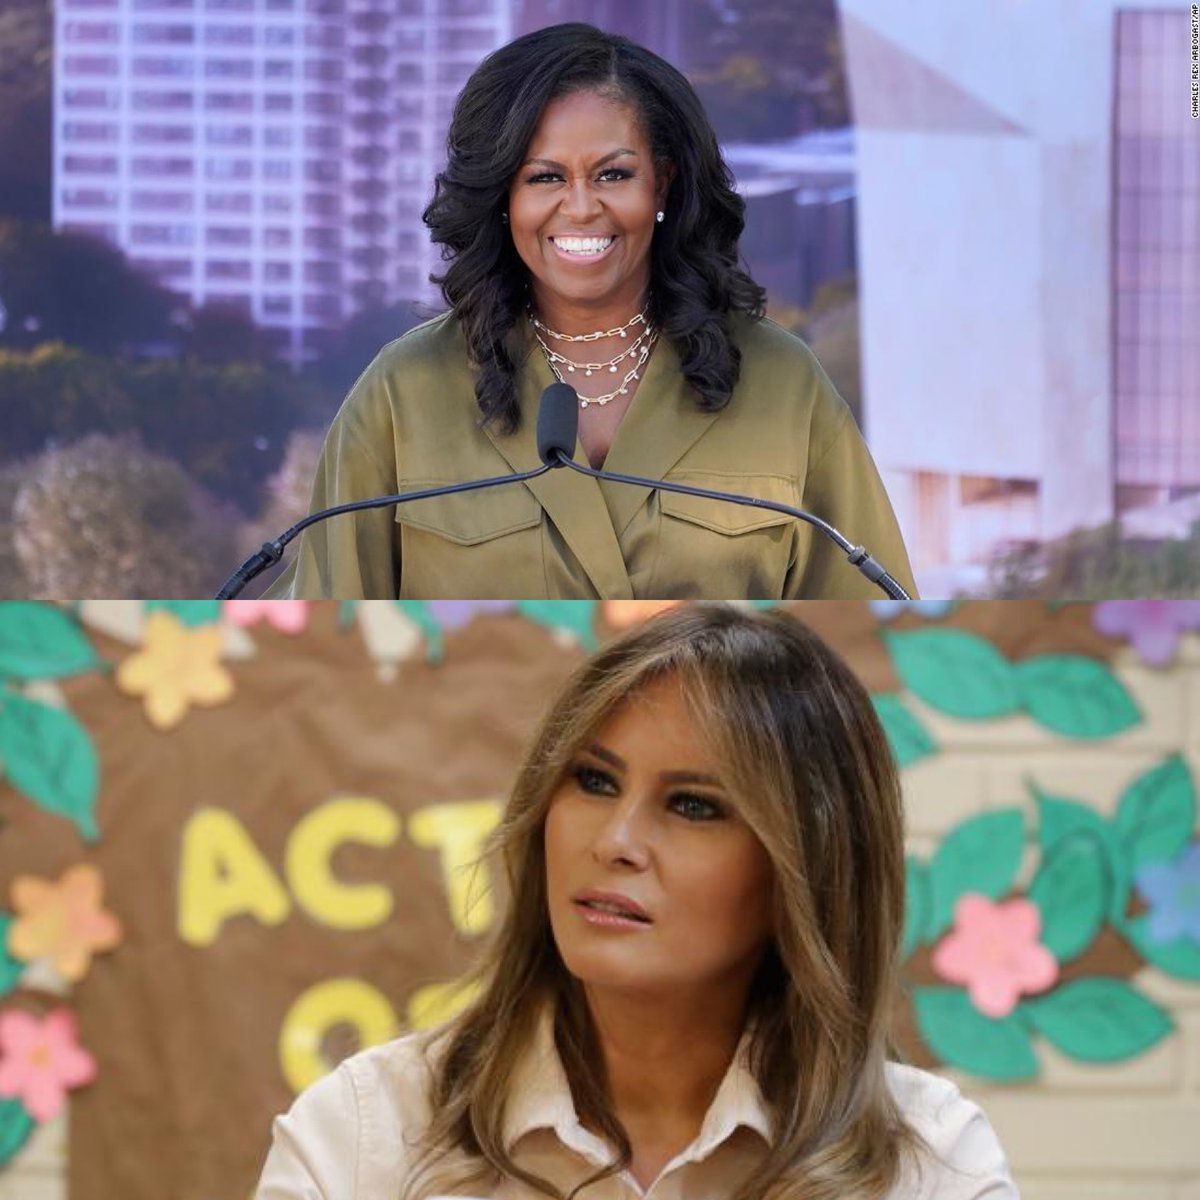 Melania will NEVER compare to Michelle Obama in class and compassion! ♥️♻️ if you agree!